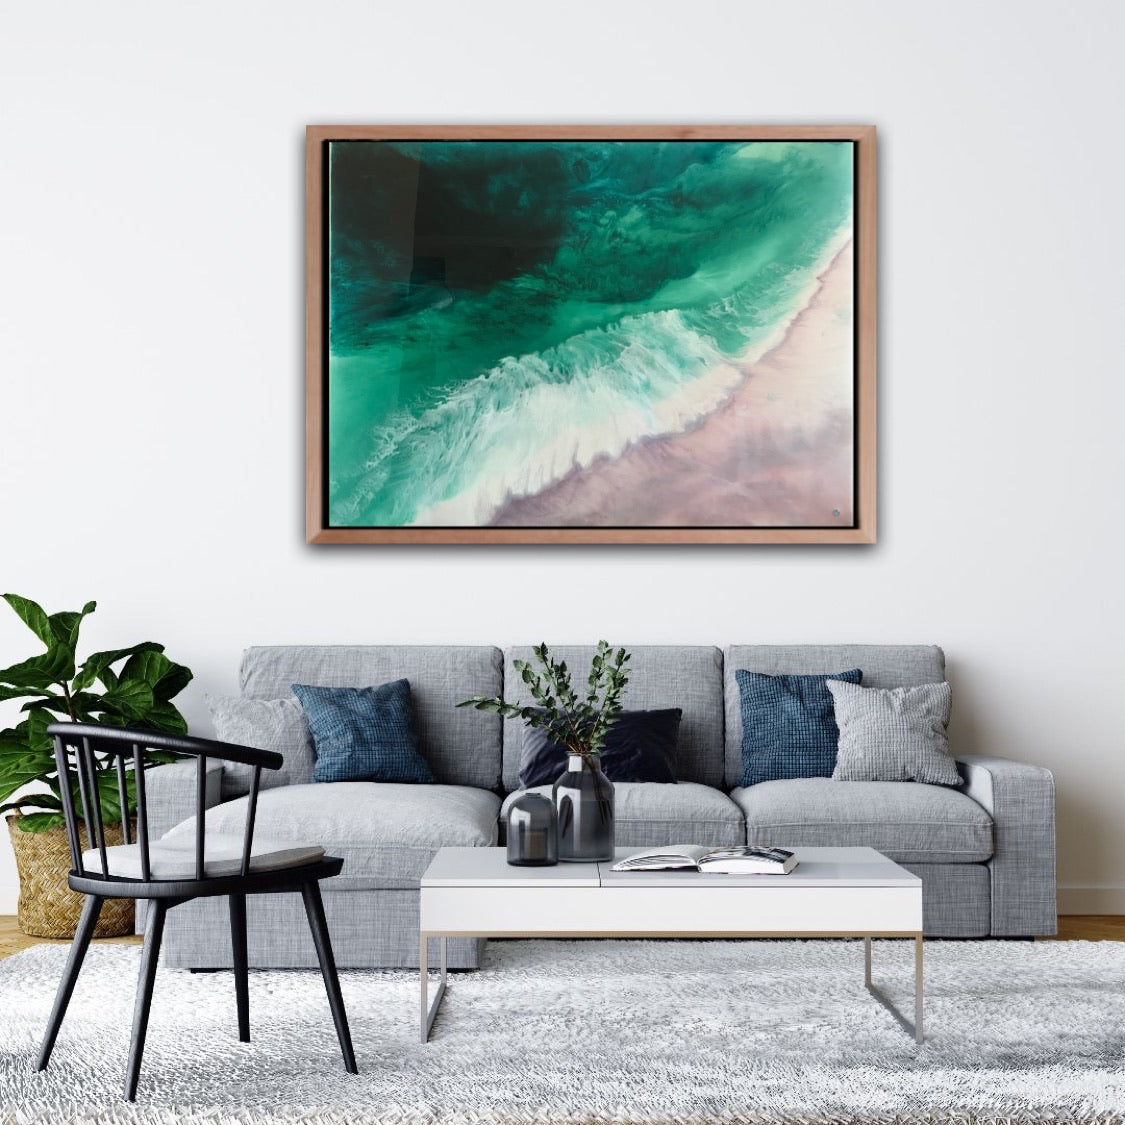 Teal Abstract Artwork. Ocean Blue. Bronte Undercurrent. Antuanelle 4 Undercurrent. Green and Pink Abstract. Original 90x120 cm